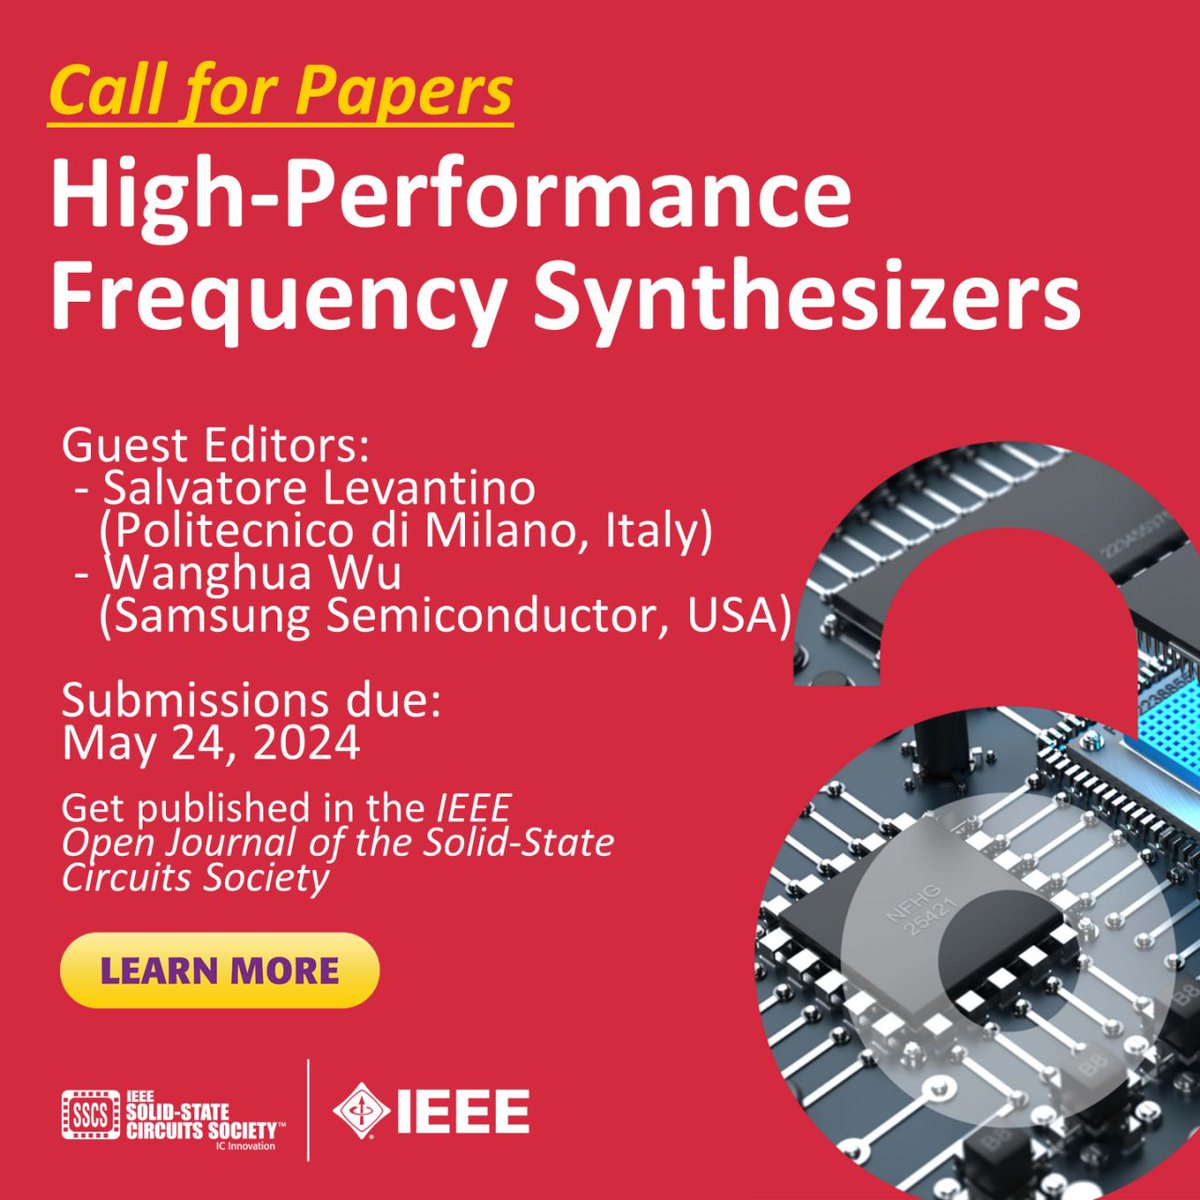 CALL FOR PAPERS: Open Journal of the Solid-State Circuits Society Special Issue on High-Performance Frequency Synthesizers. For topics of interest and more details click here: bit.ly/42xiVHm